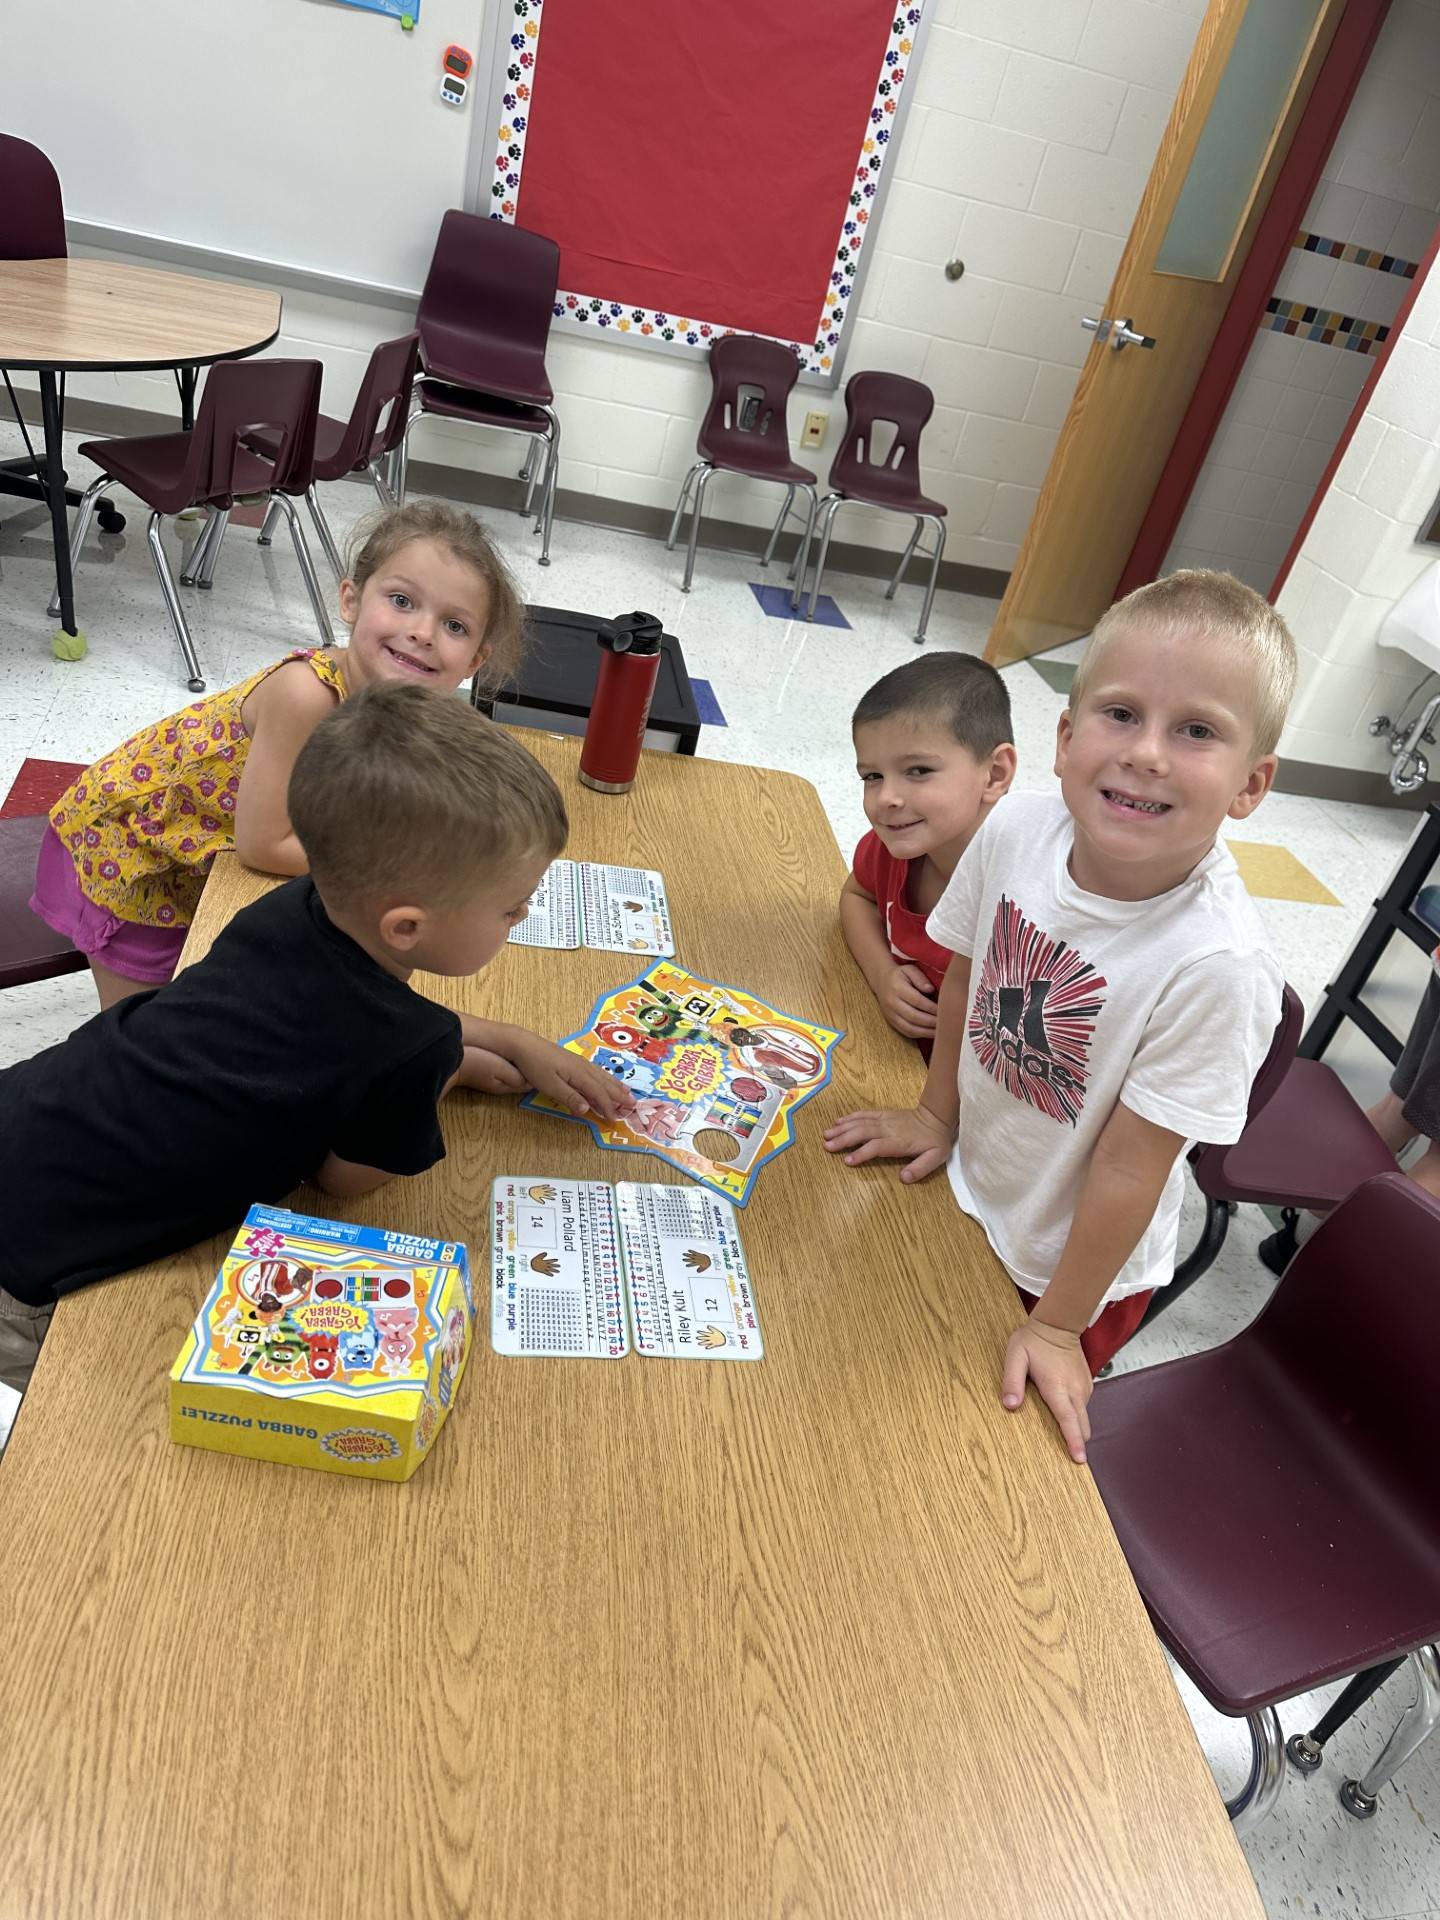 kindergarten students around table playing game